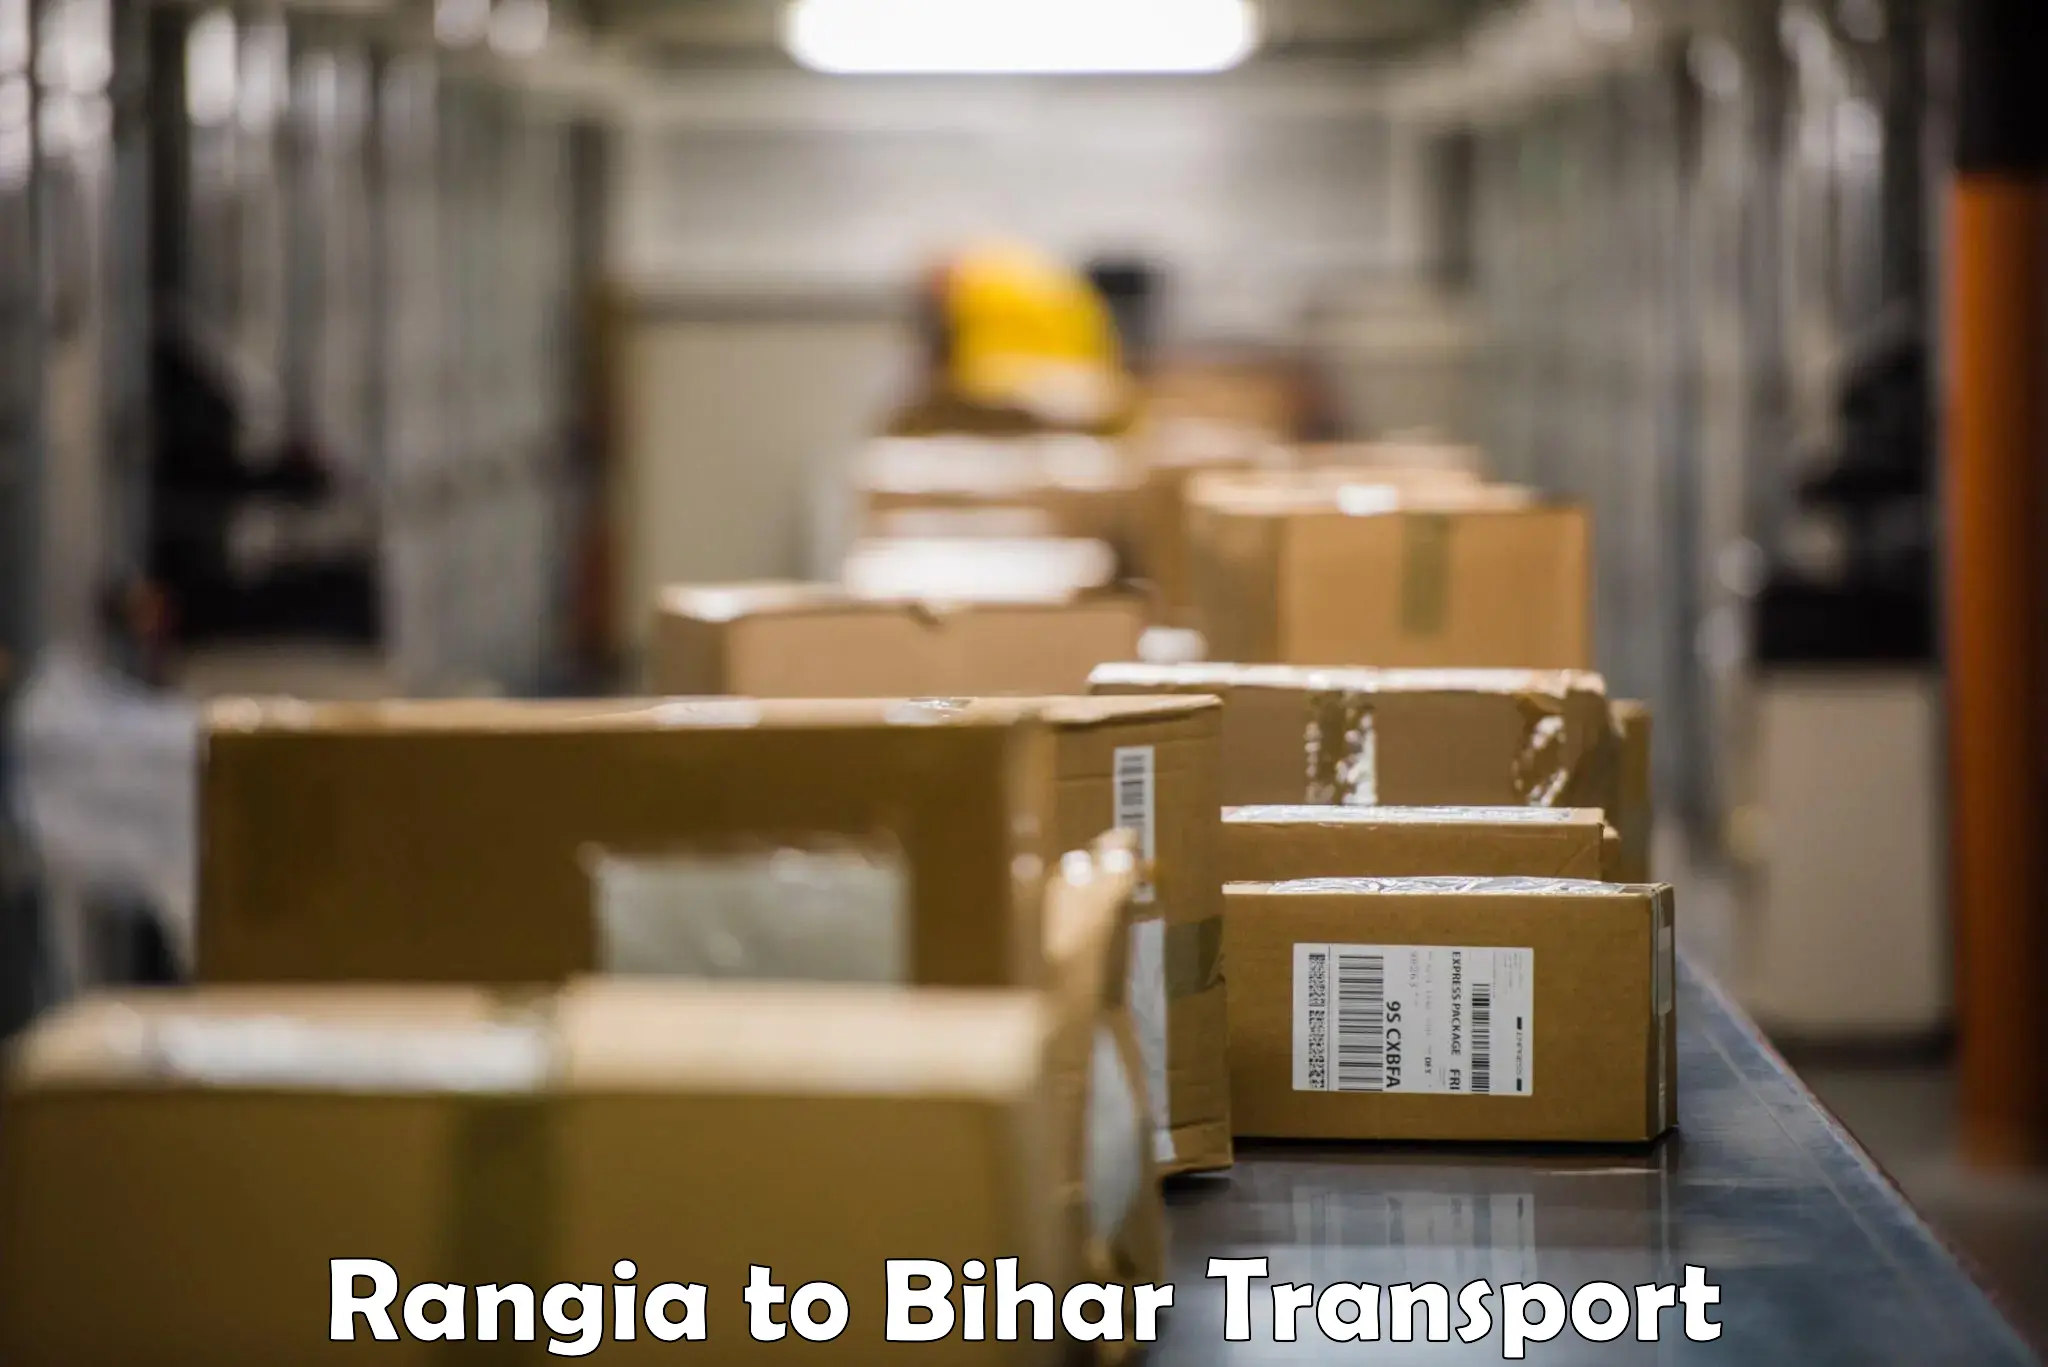 Truck transport companies in India Rangia to Nawada